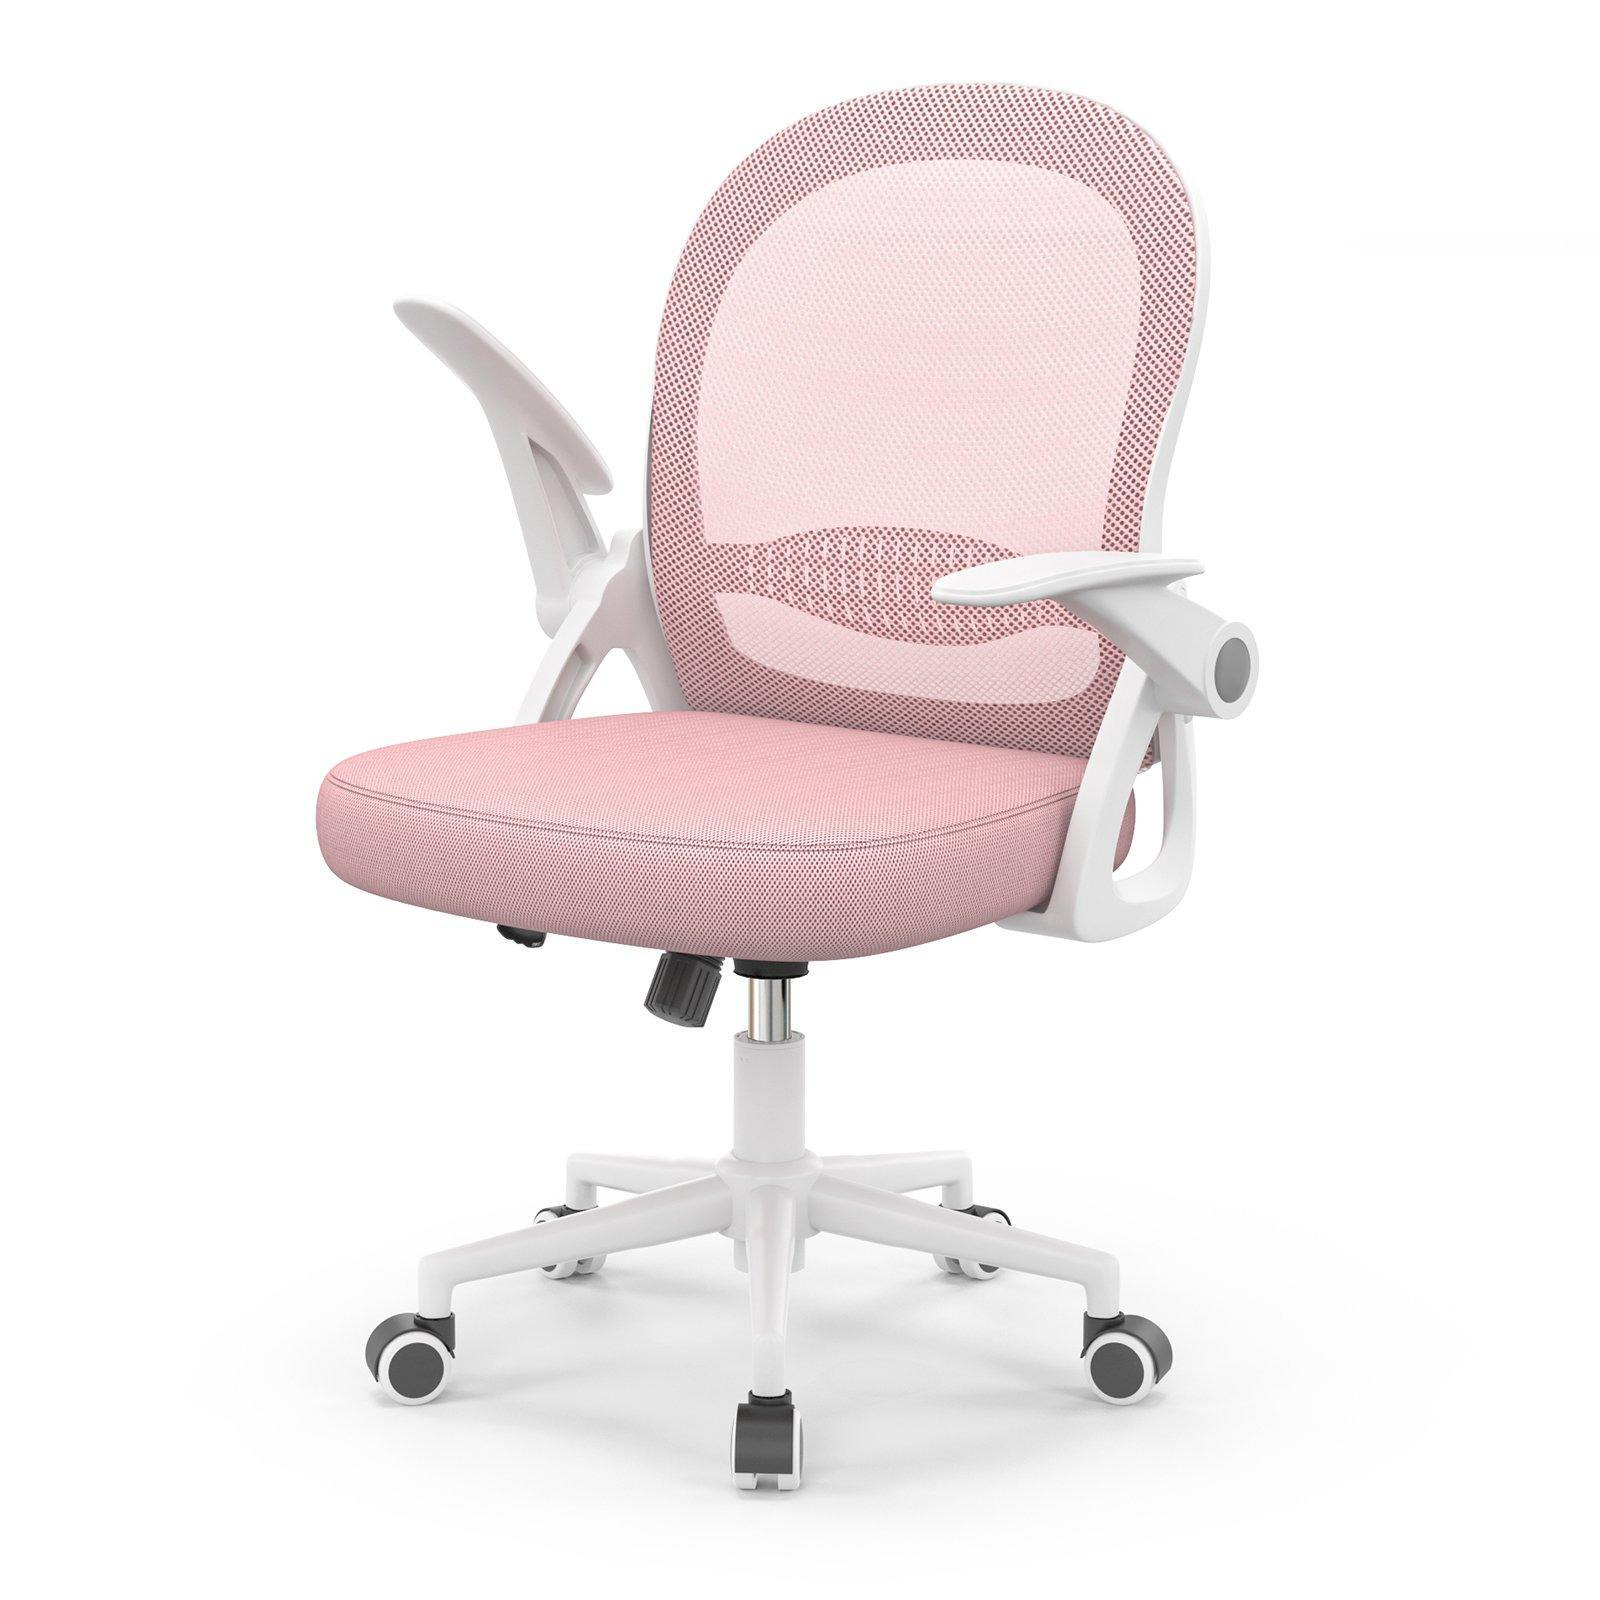 Mid-Back Mesh Chair Ergonomic Desk Chair with Flip-up Armrests and Lumbar Support - image 1